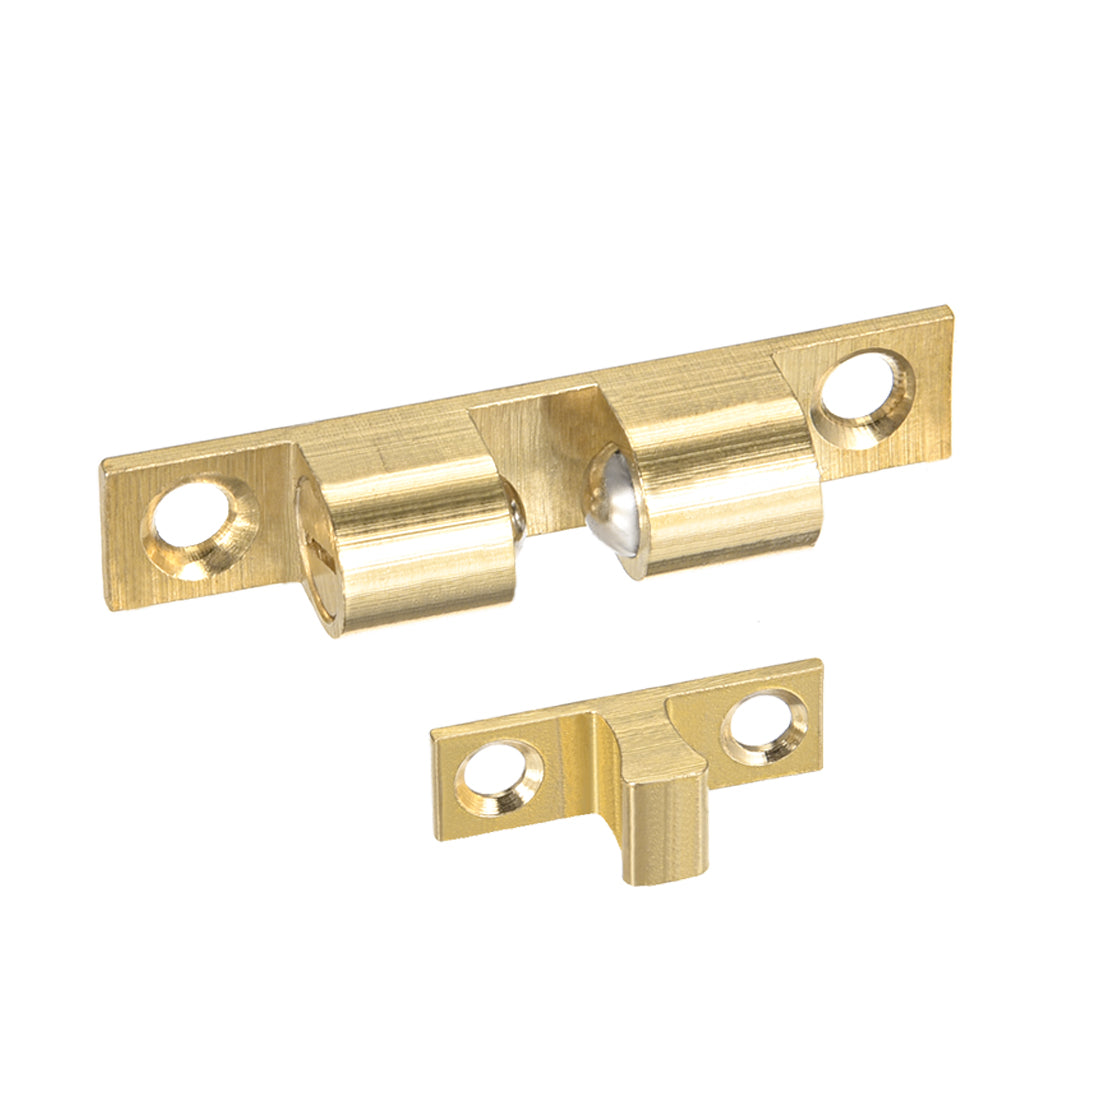 uxcell Uxcell Cabinet Door Closet Brass Double Ball Catch Tension Latch 50mm Length Gold Tone 5pcs